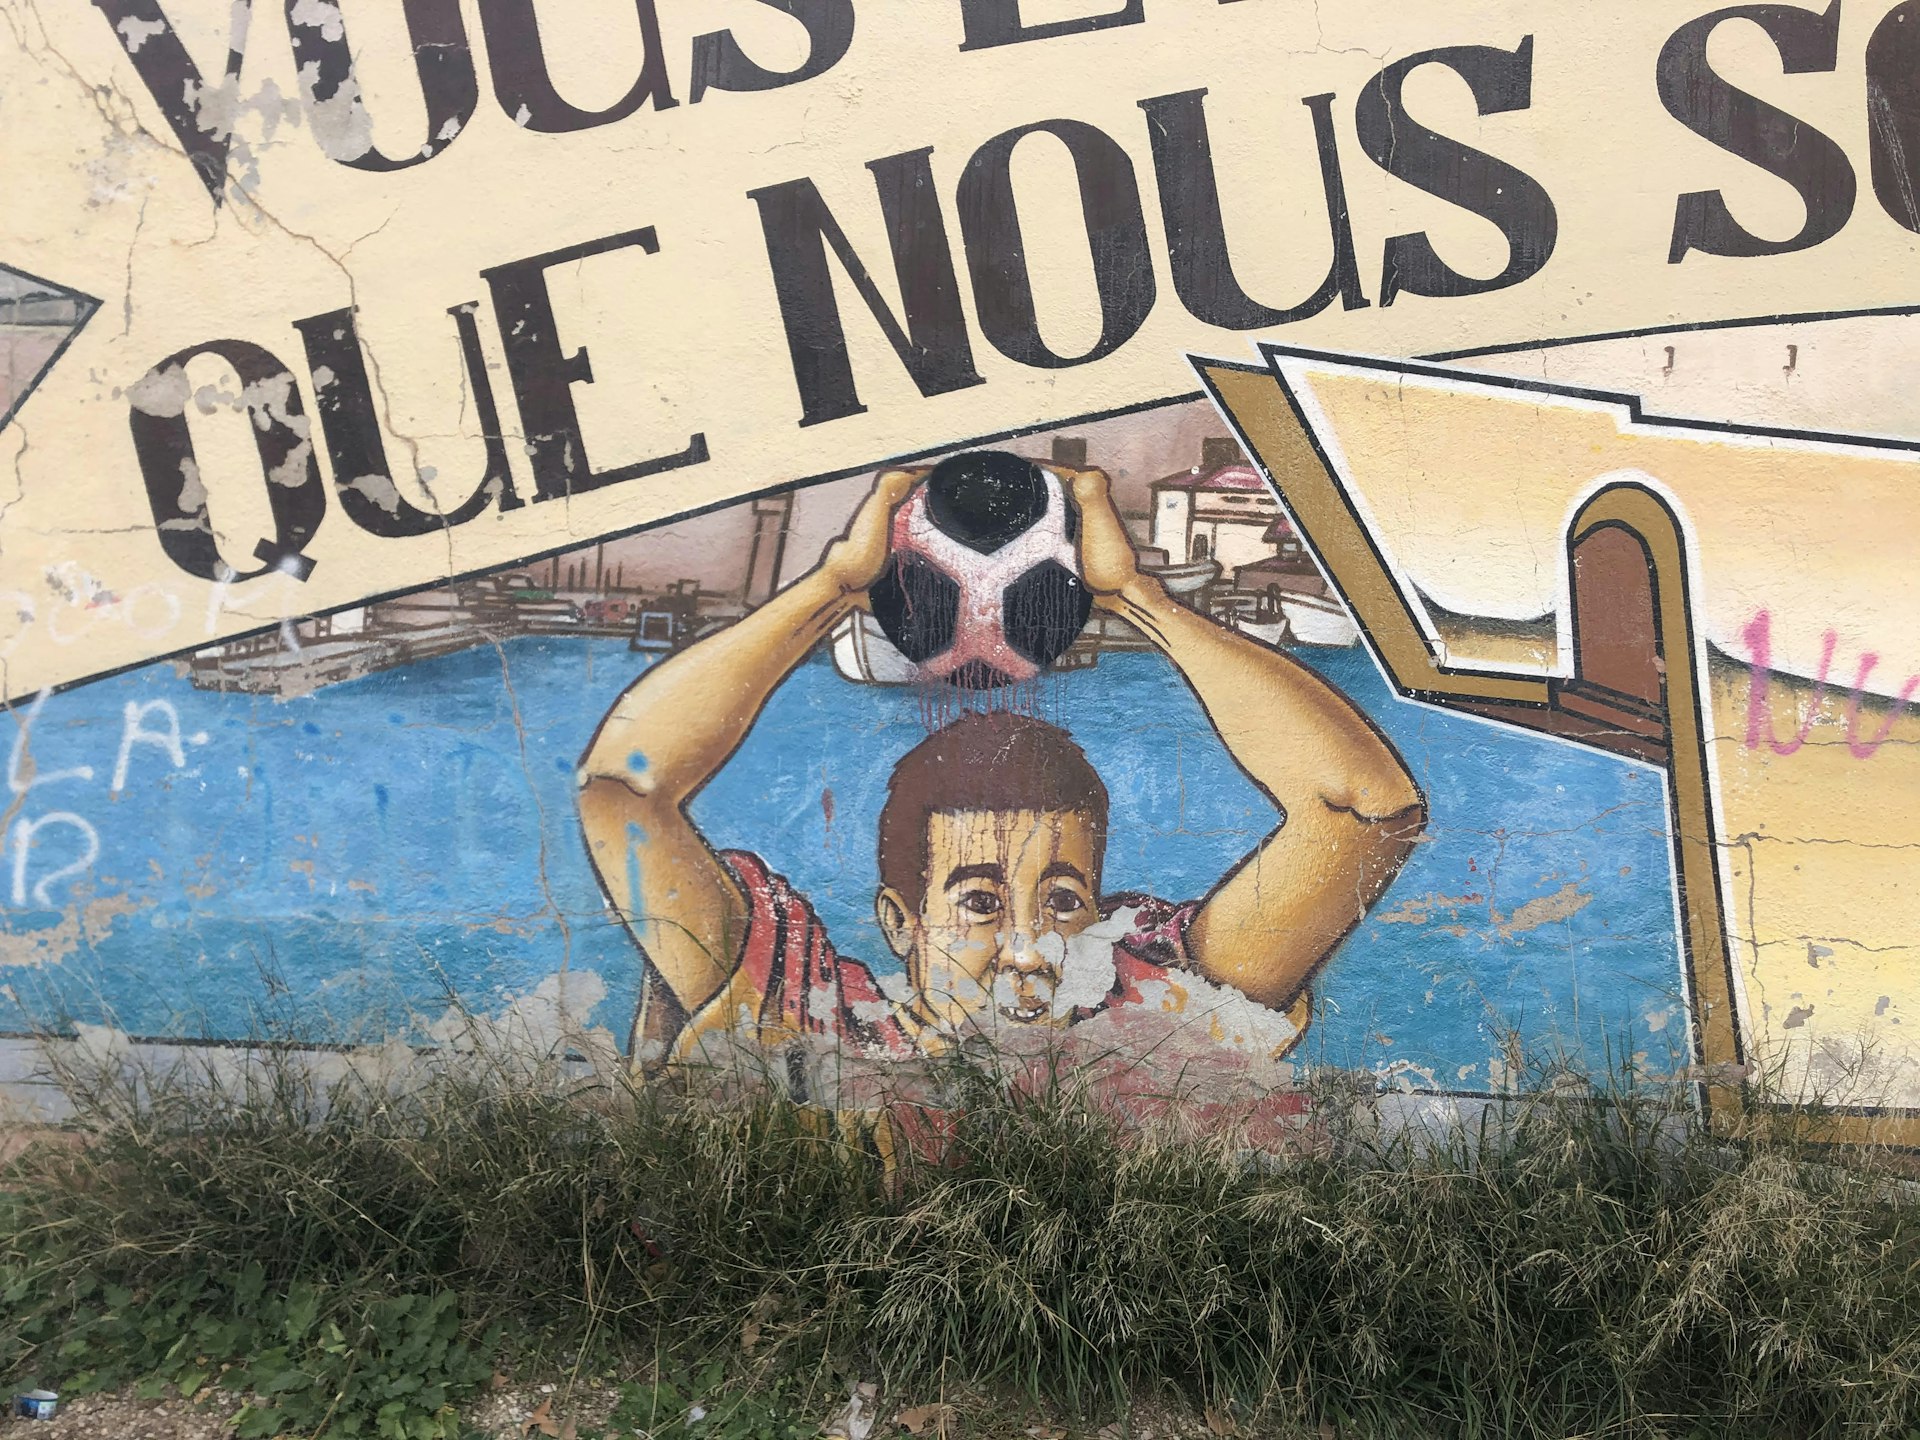 A mural showing a boy throwing in a soccer ball under the words "que nous" 